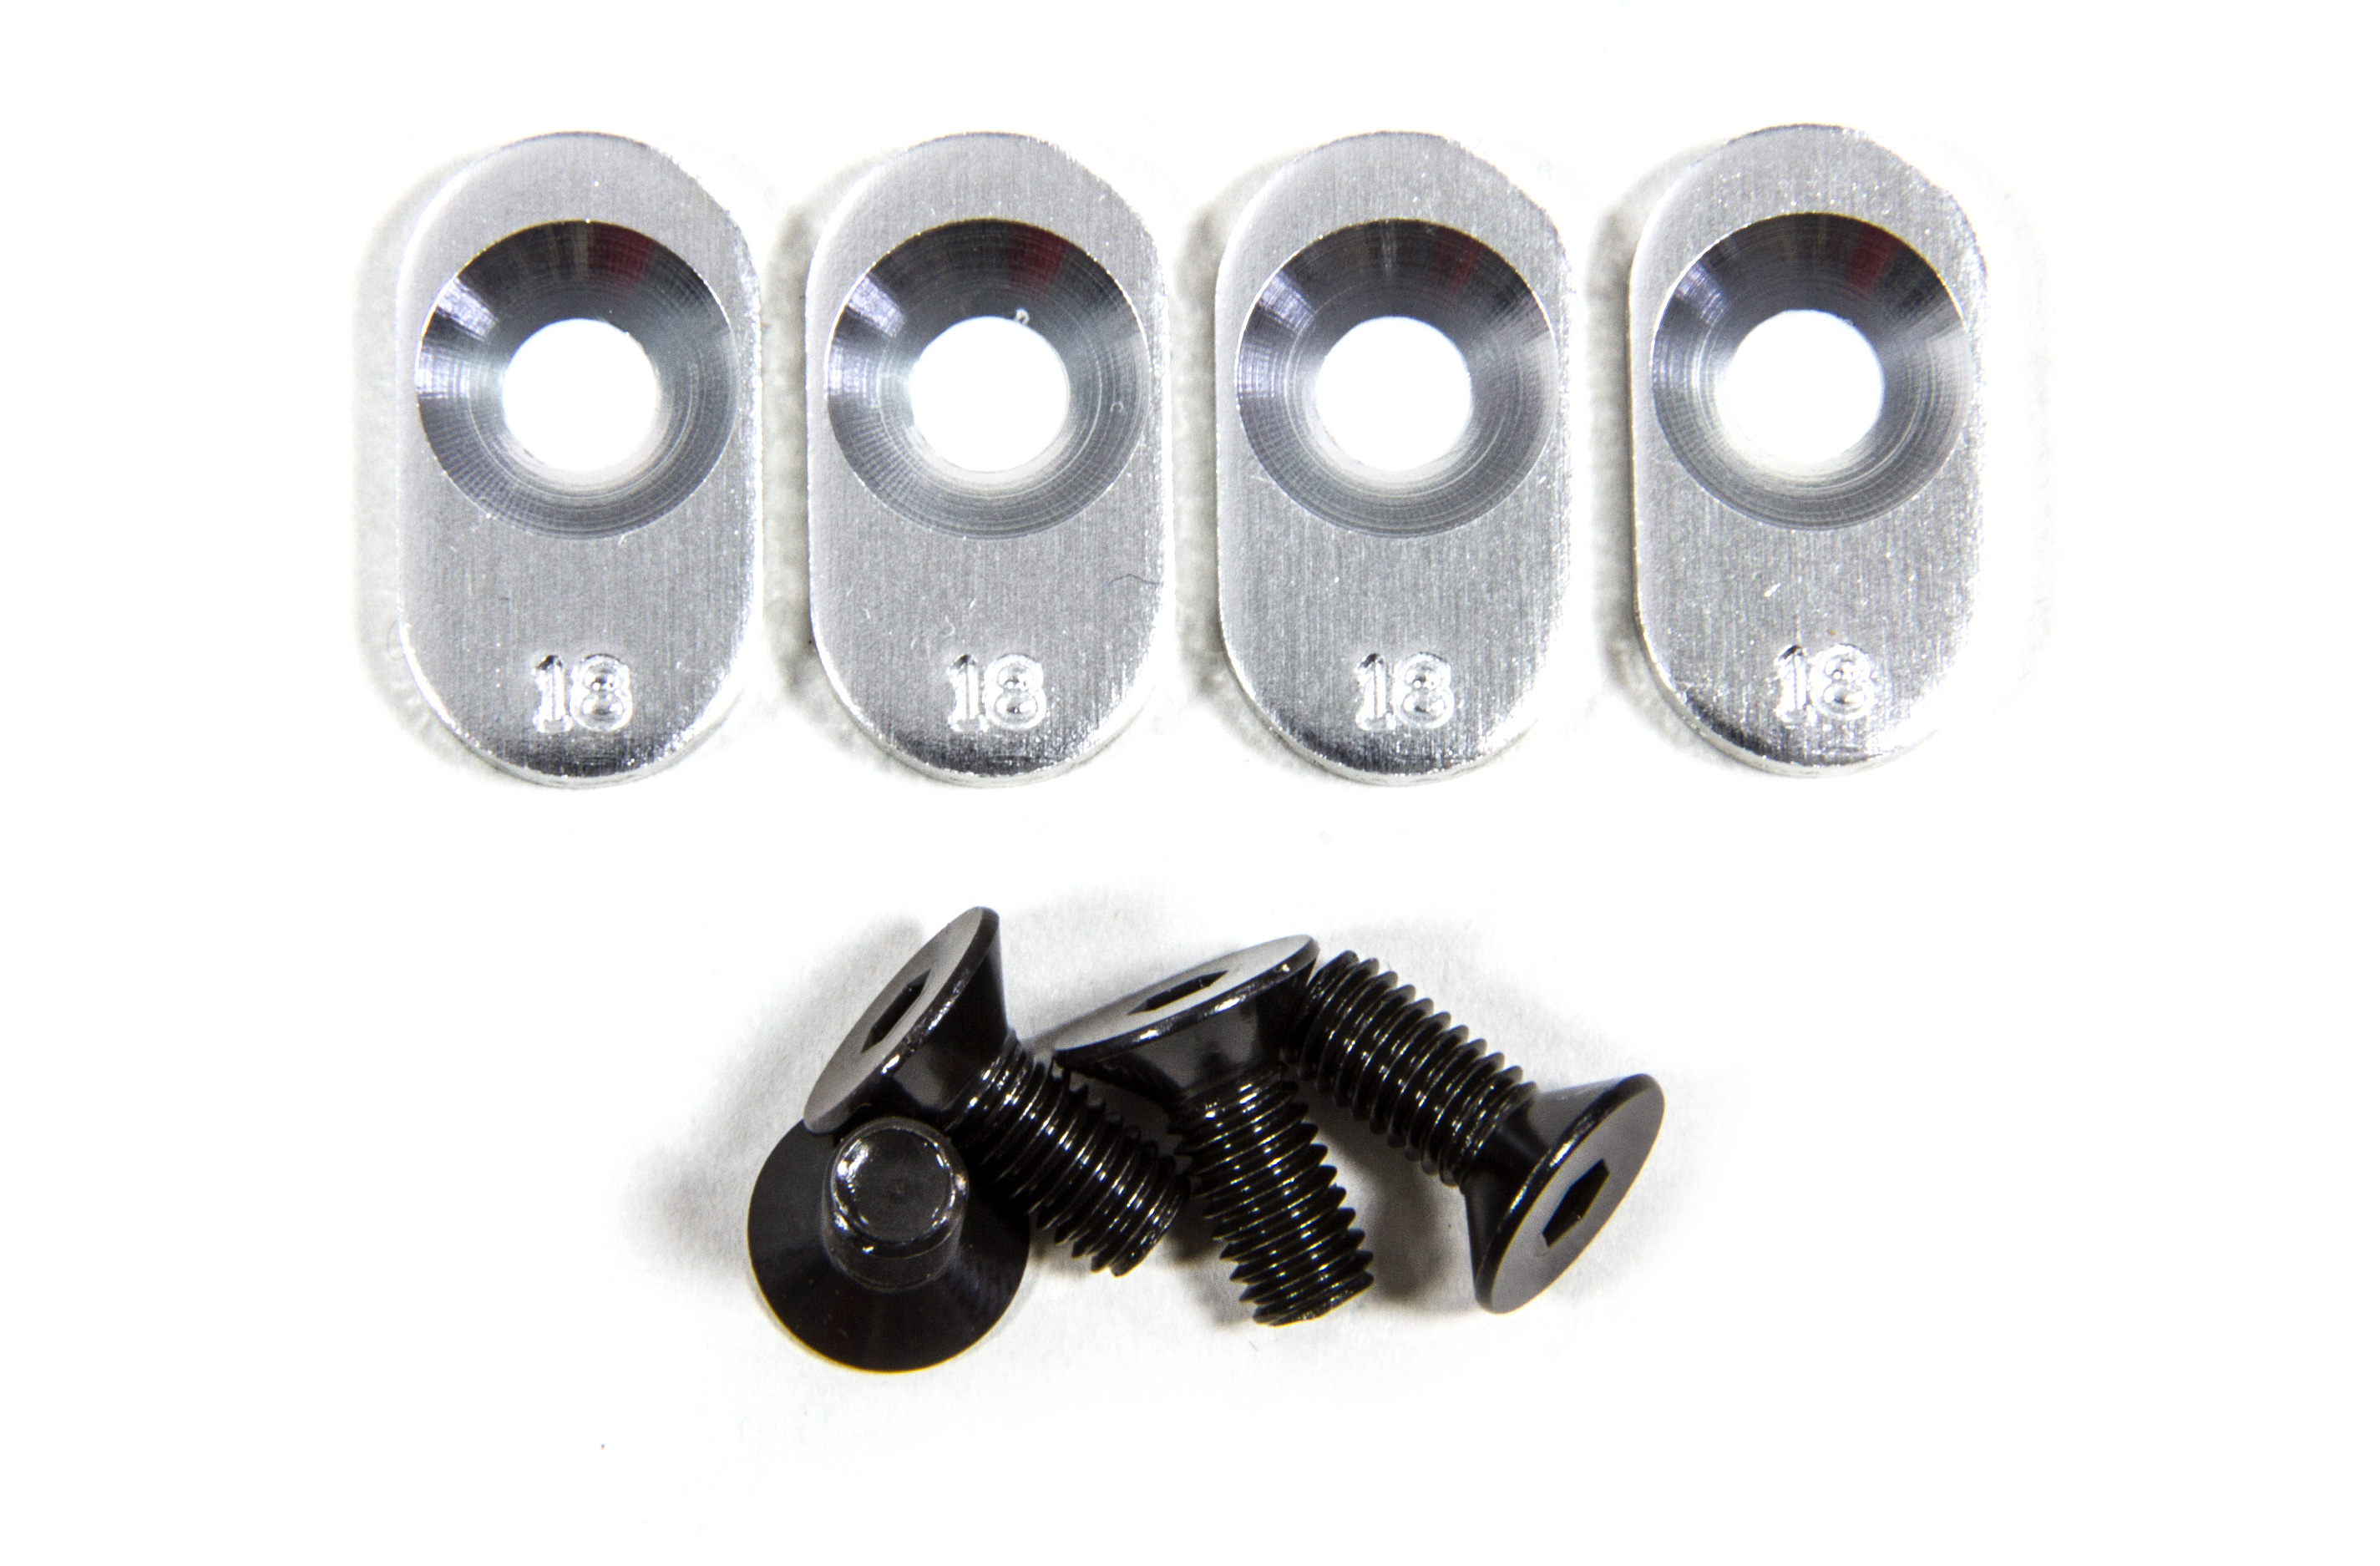 LOSB5805 Losi Engine Mount Inserts & Screws, 18/58 for 5ive-T, TLR 5ive-B and Mini WRC